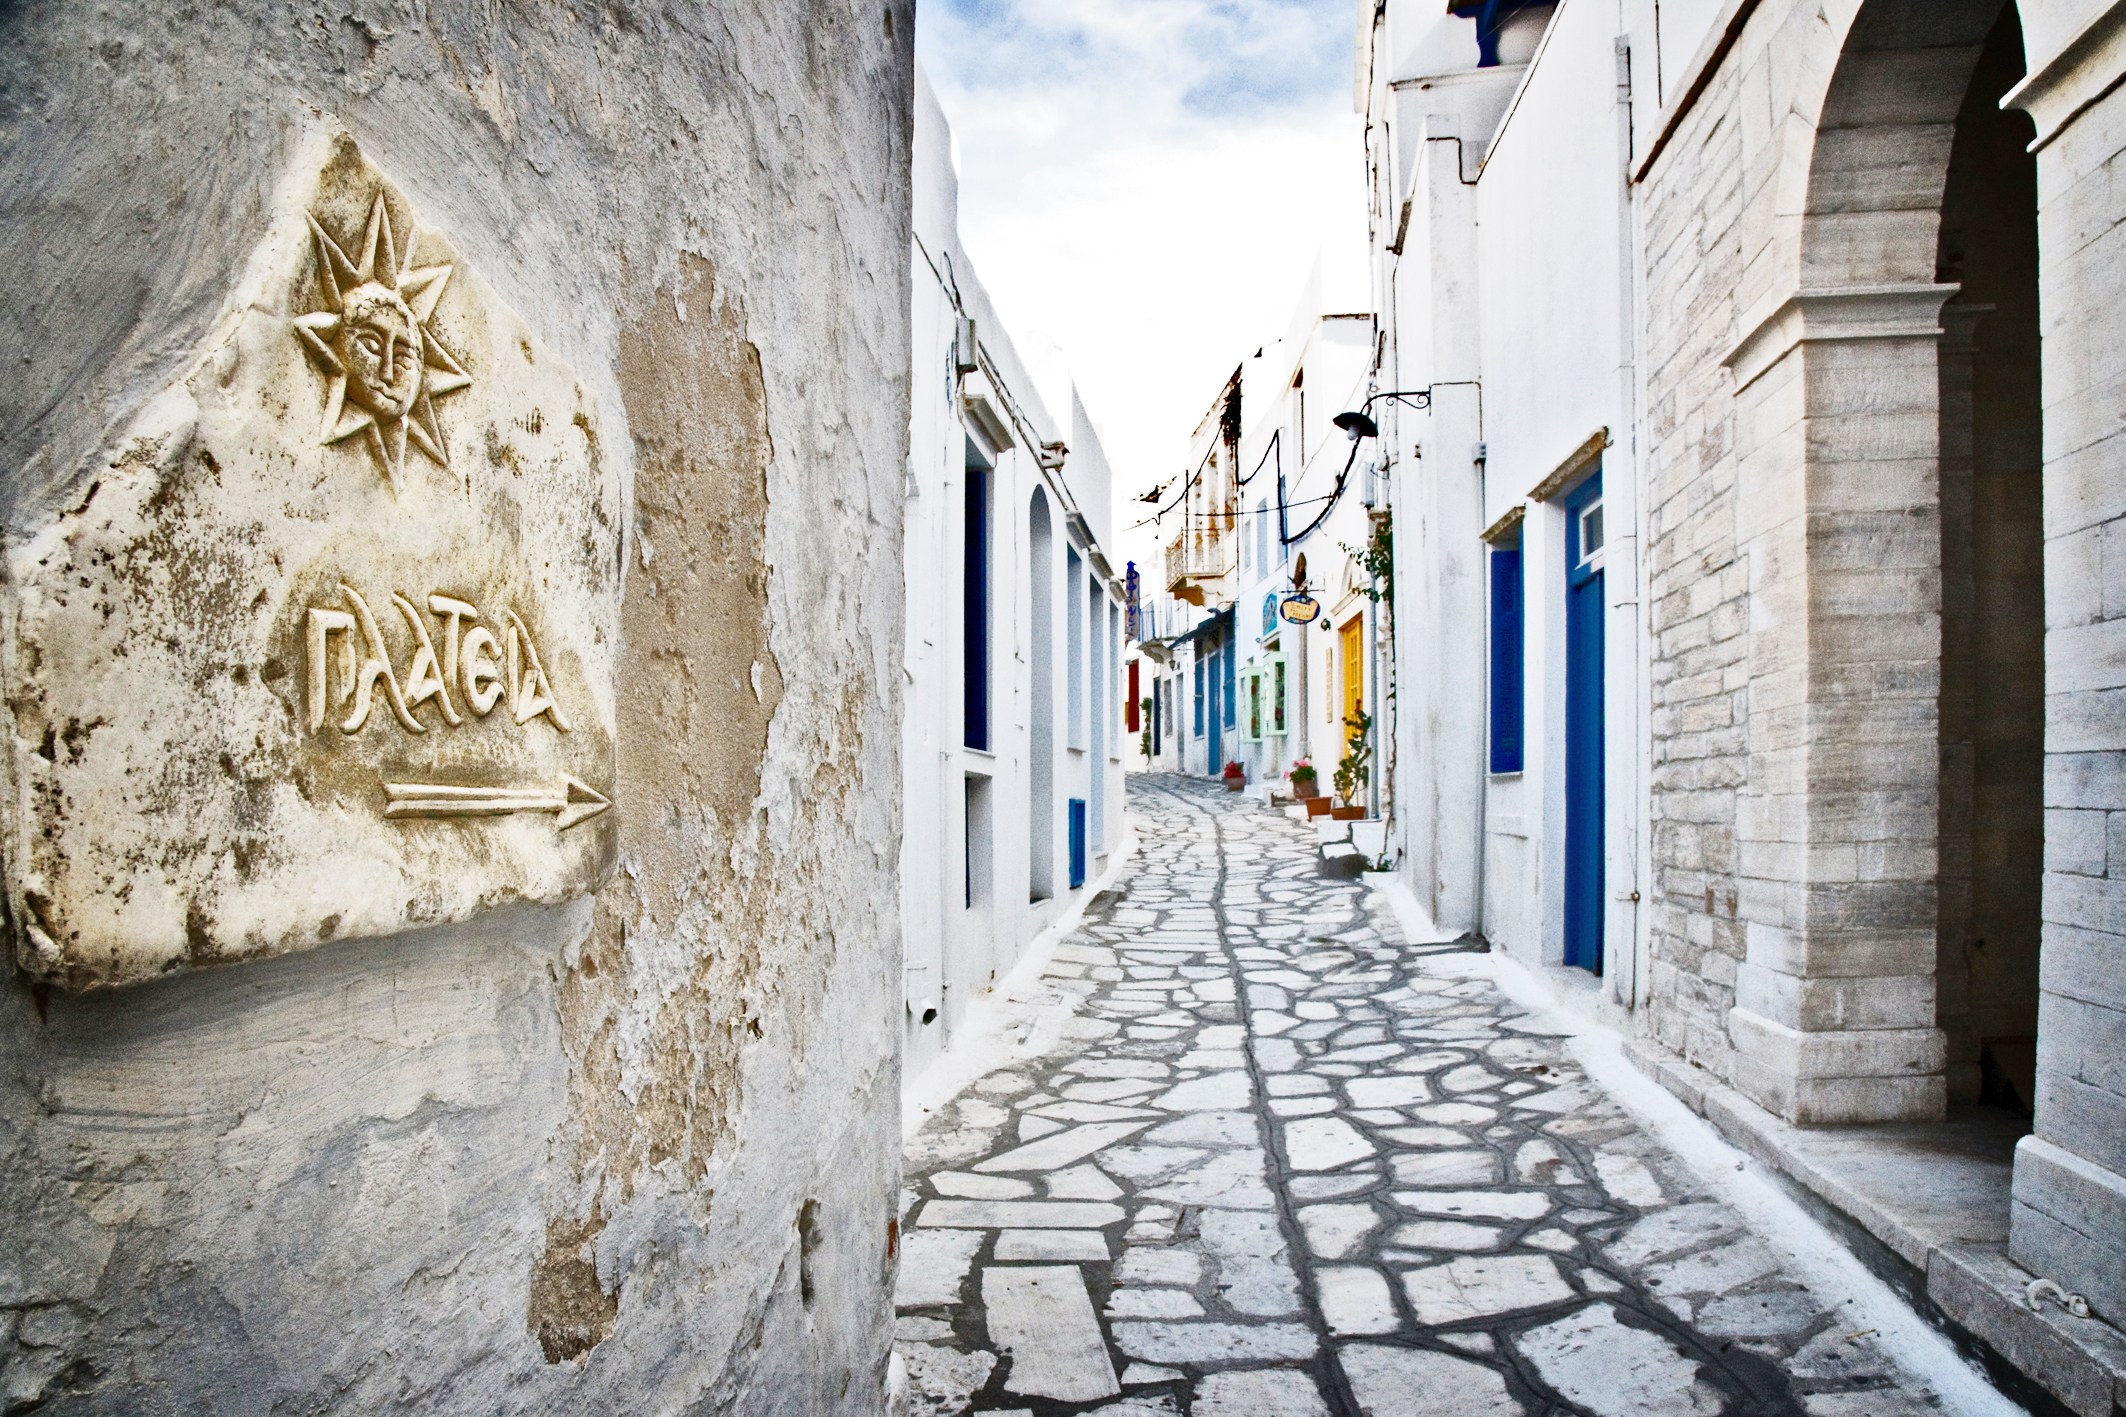 The traditional village of Pyrgos, with its mountainous landscape, is made largely from marble